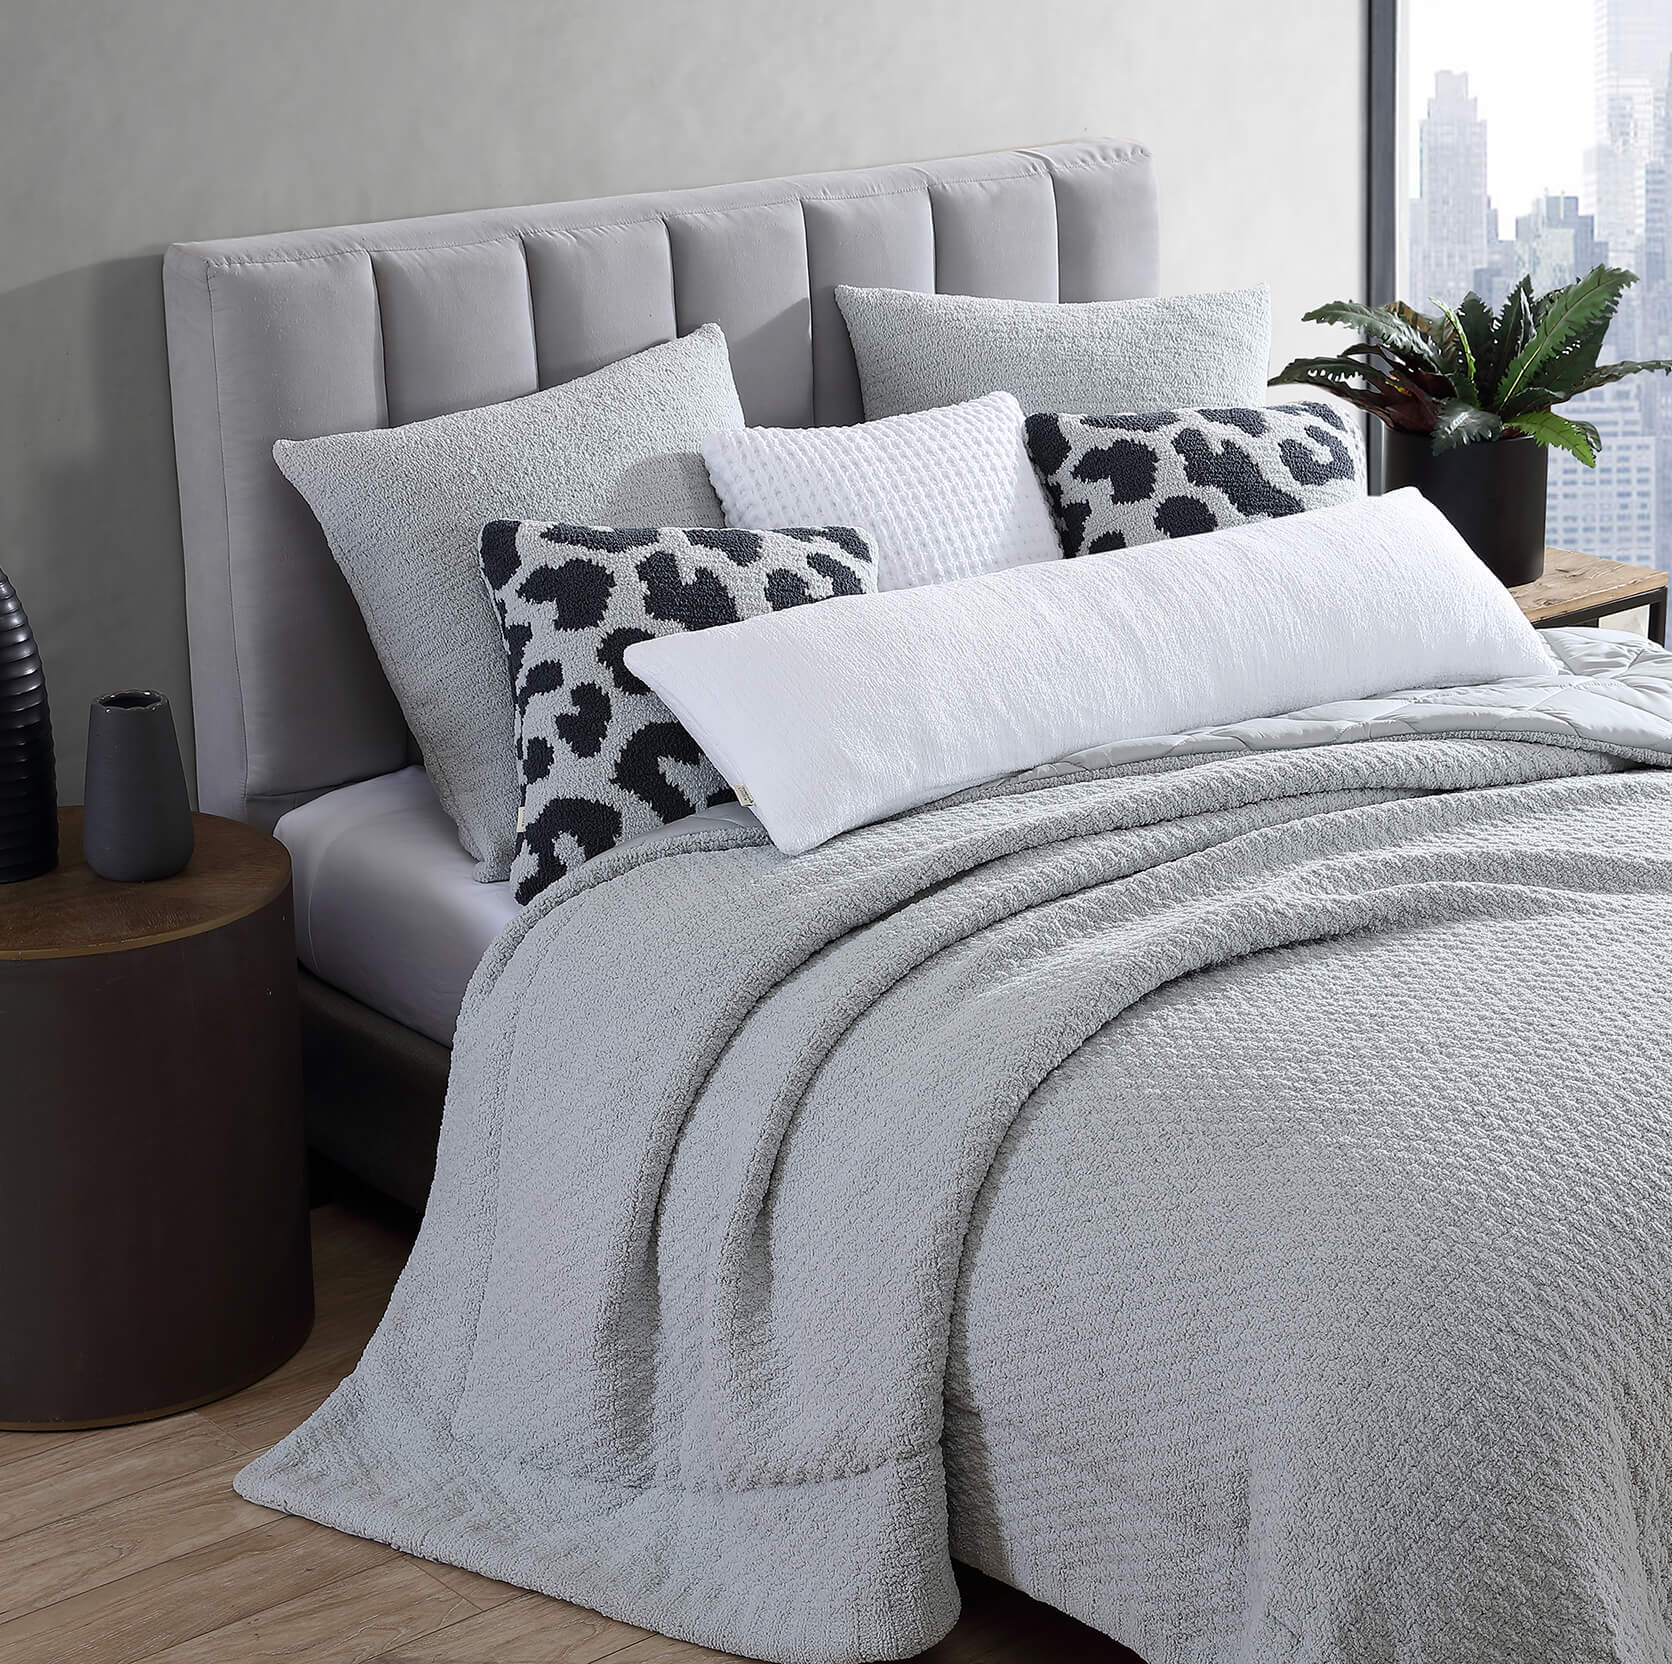 Grey comforter. Grey bedding and pillows. Fun neutral patterned pillows. Grey modern bedroom inspo.